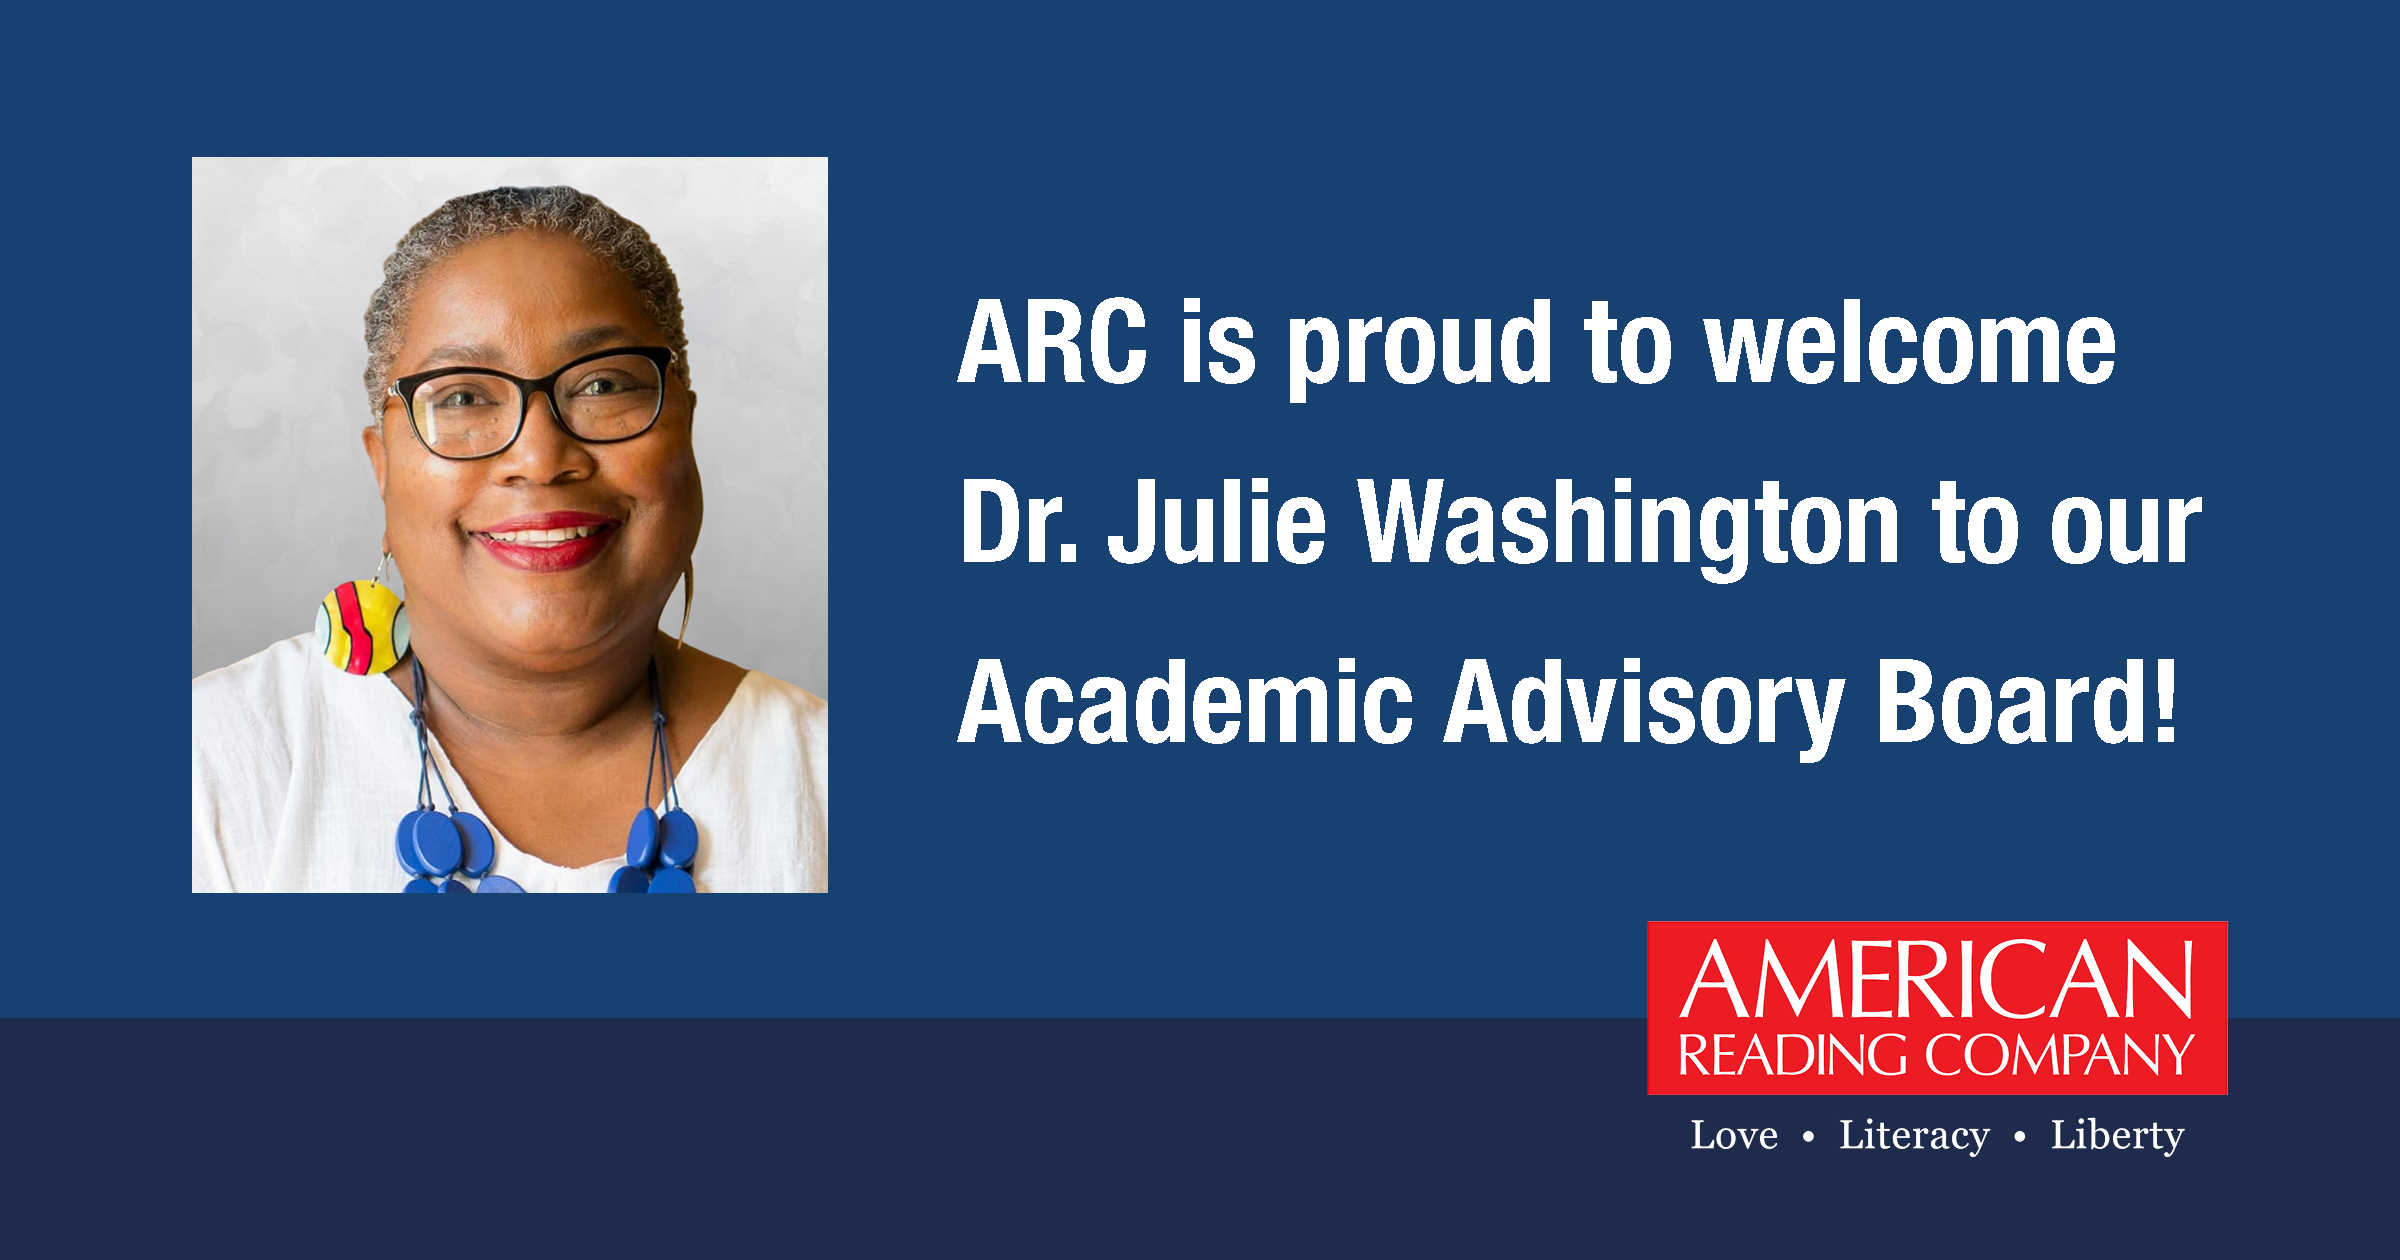 Cultural Dialect Expert Dr. Julie Washington Appointed to American Reading Company's Academic Advisory Board